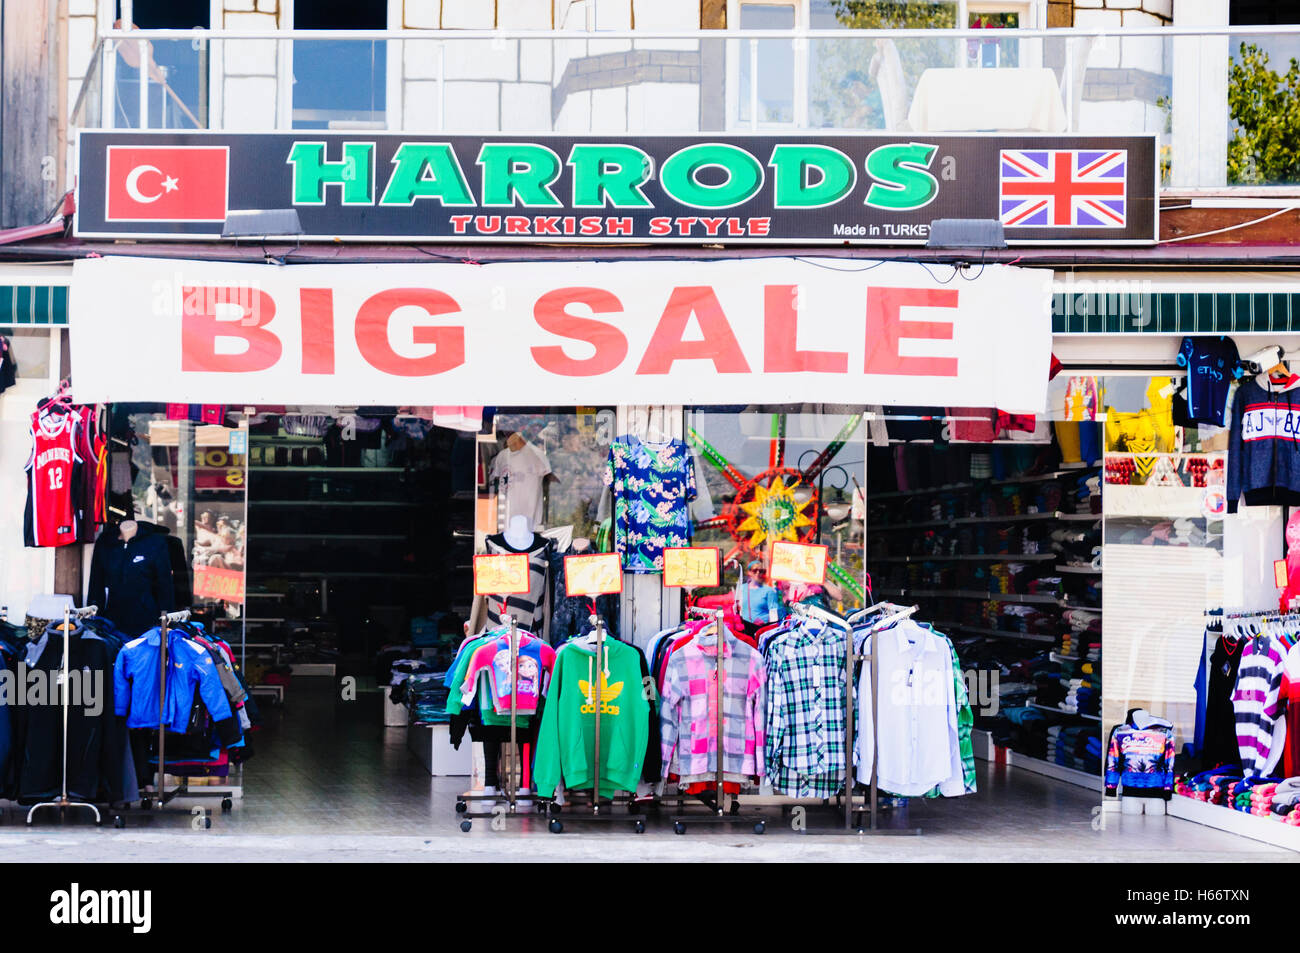 Shop in Turkey called "Harrods" selling counterfeit clothing, sportswear  and handbags, with sign saying "Big Sale Stock Photo - Alamy